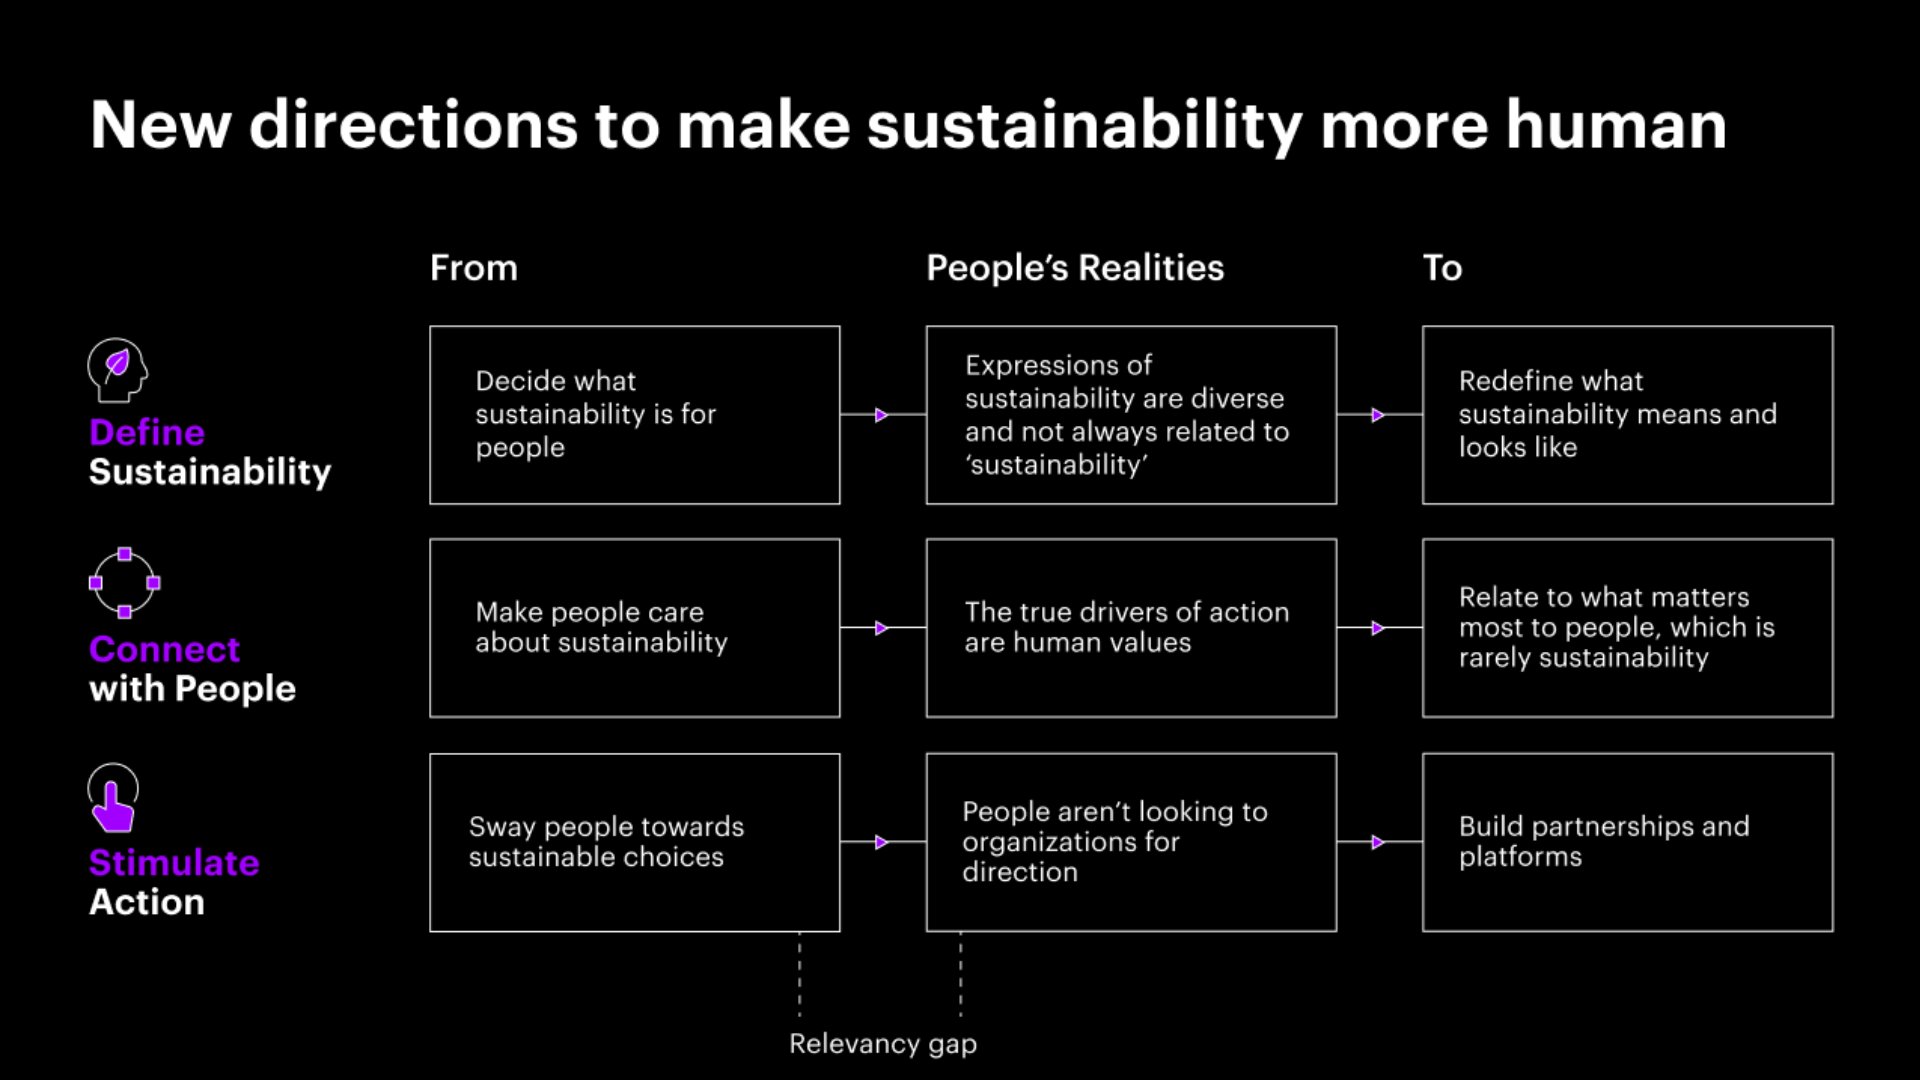 Diagram showing new directions to make sustainability more human